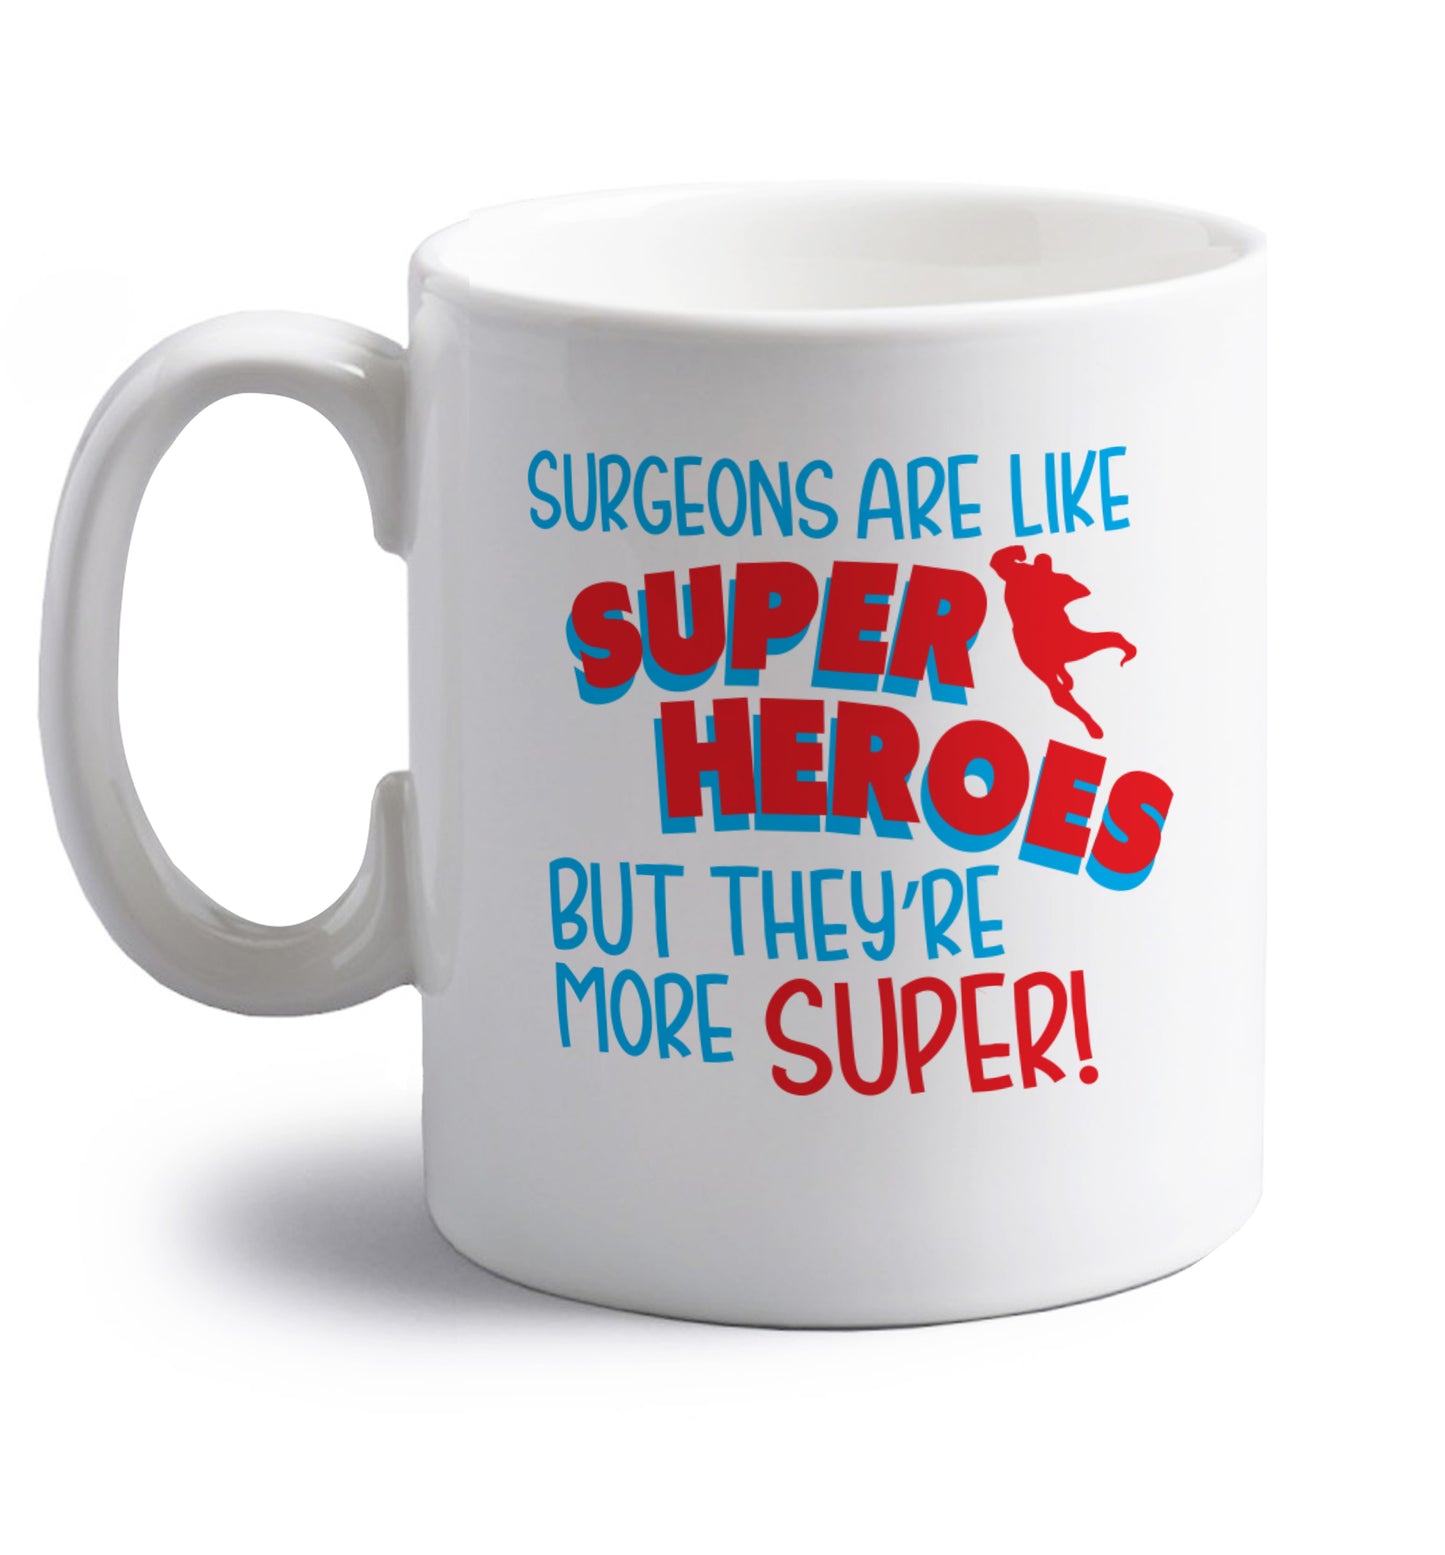 Surgeons are like superheros but they're more super right handed white ceramic mug 